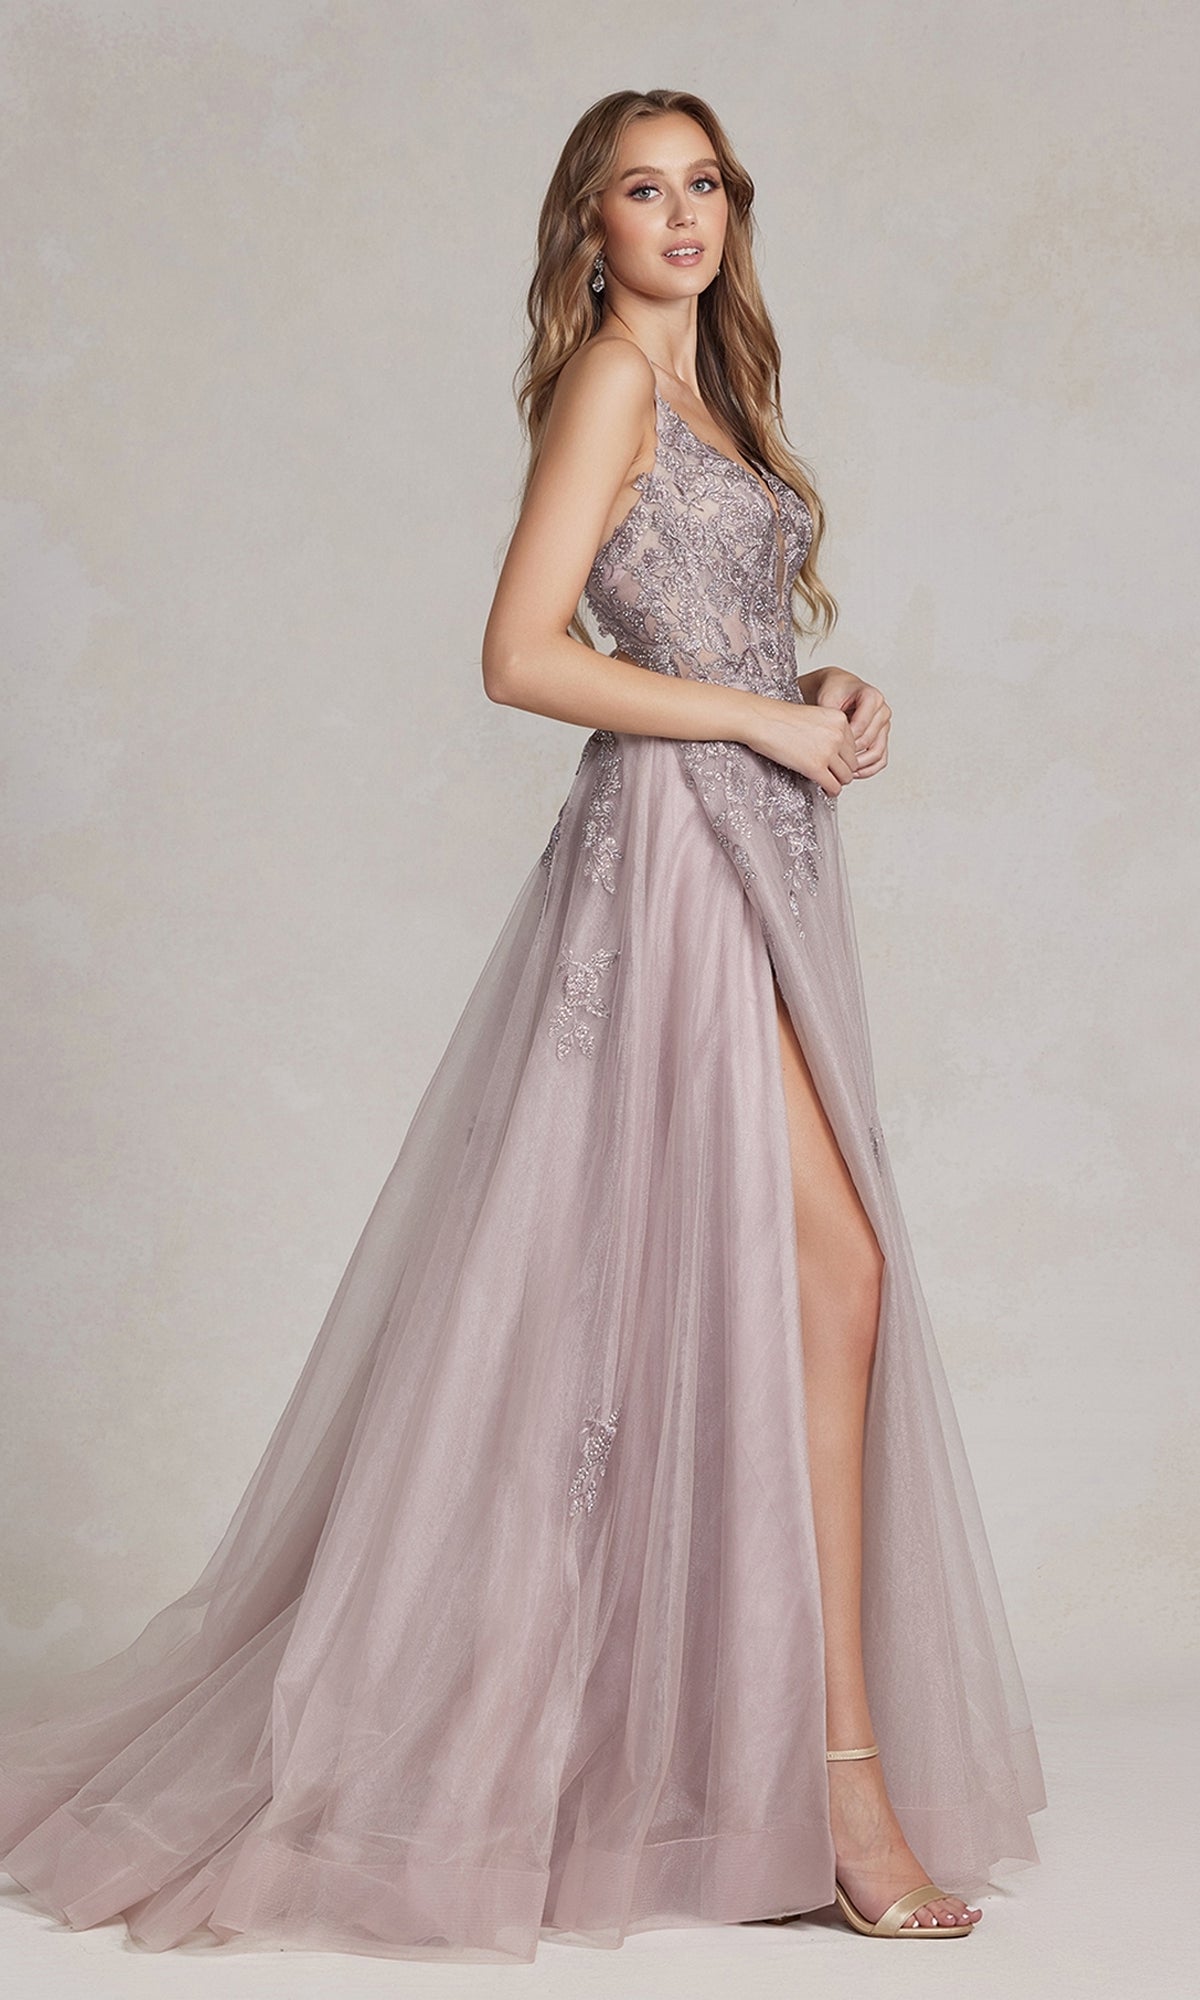  Long A-Line Lace Prom Dress with Wrap-Style Skirt